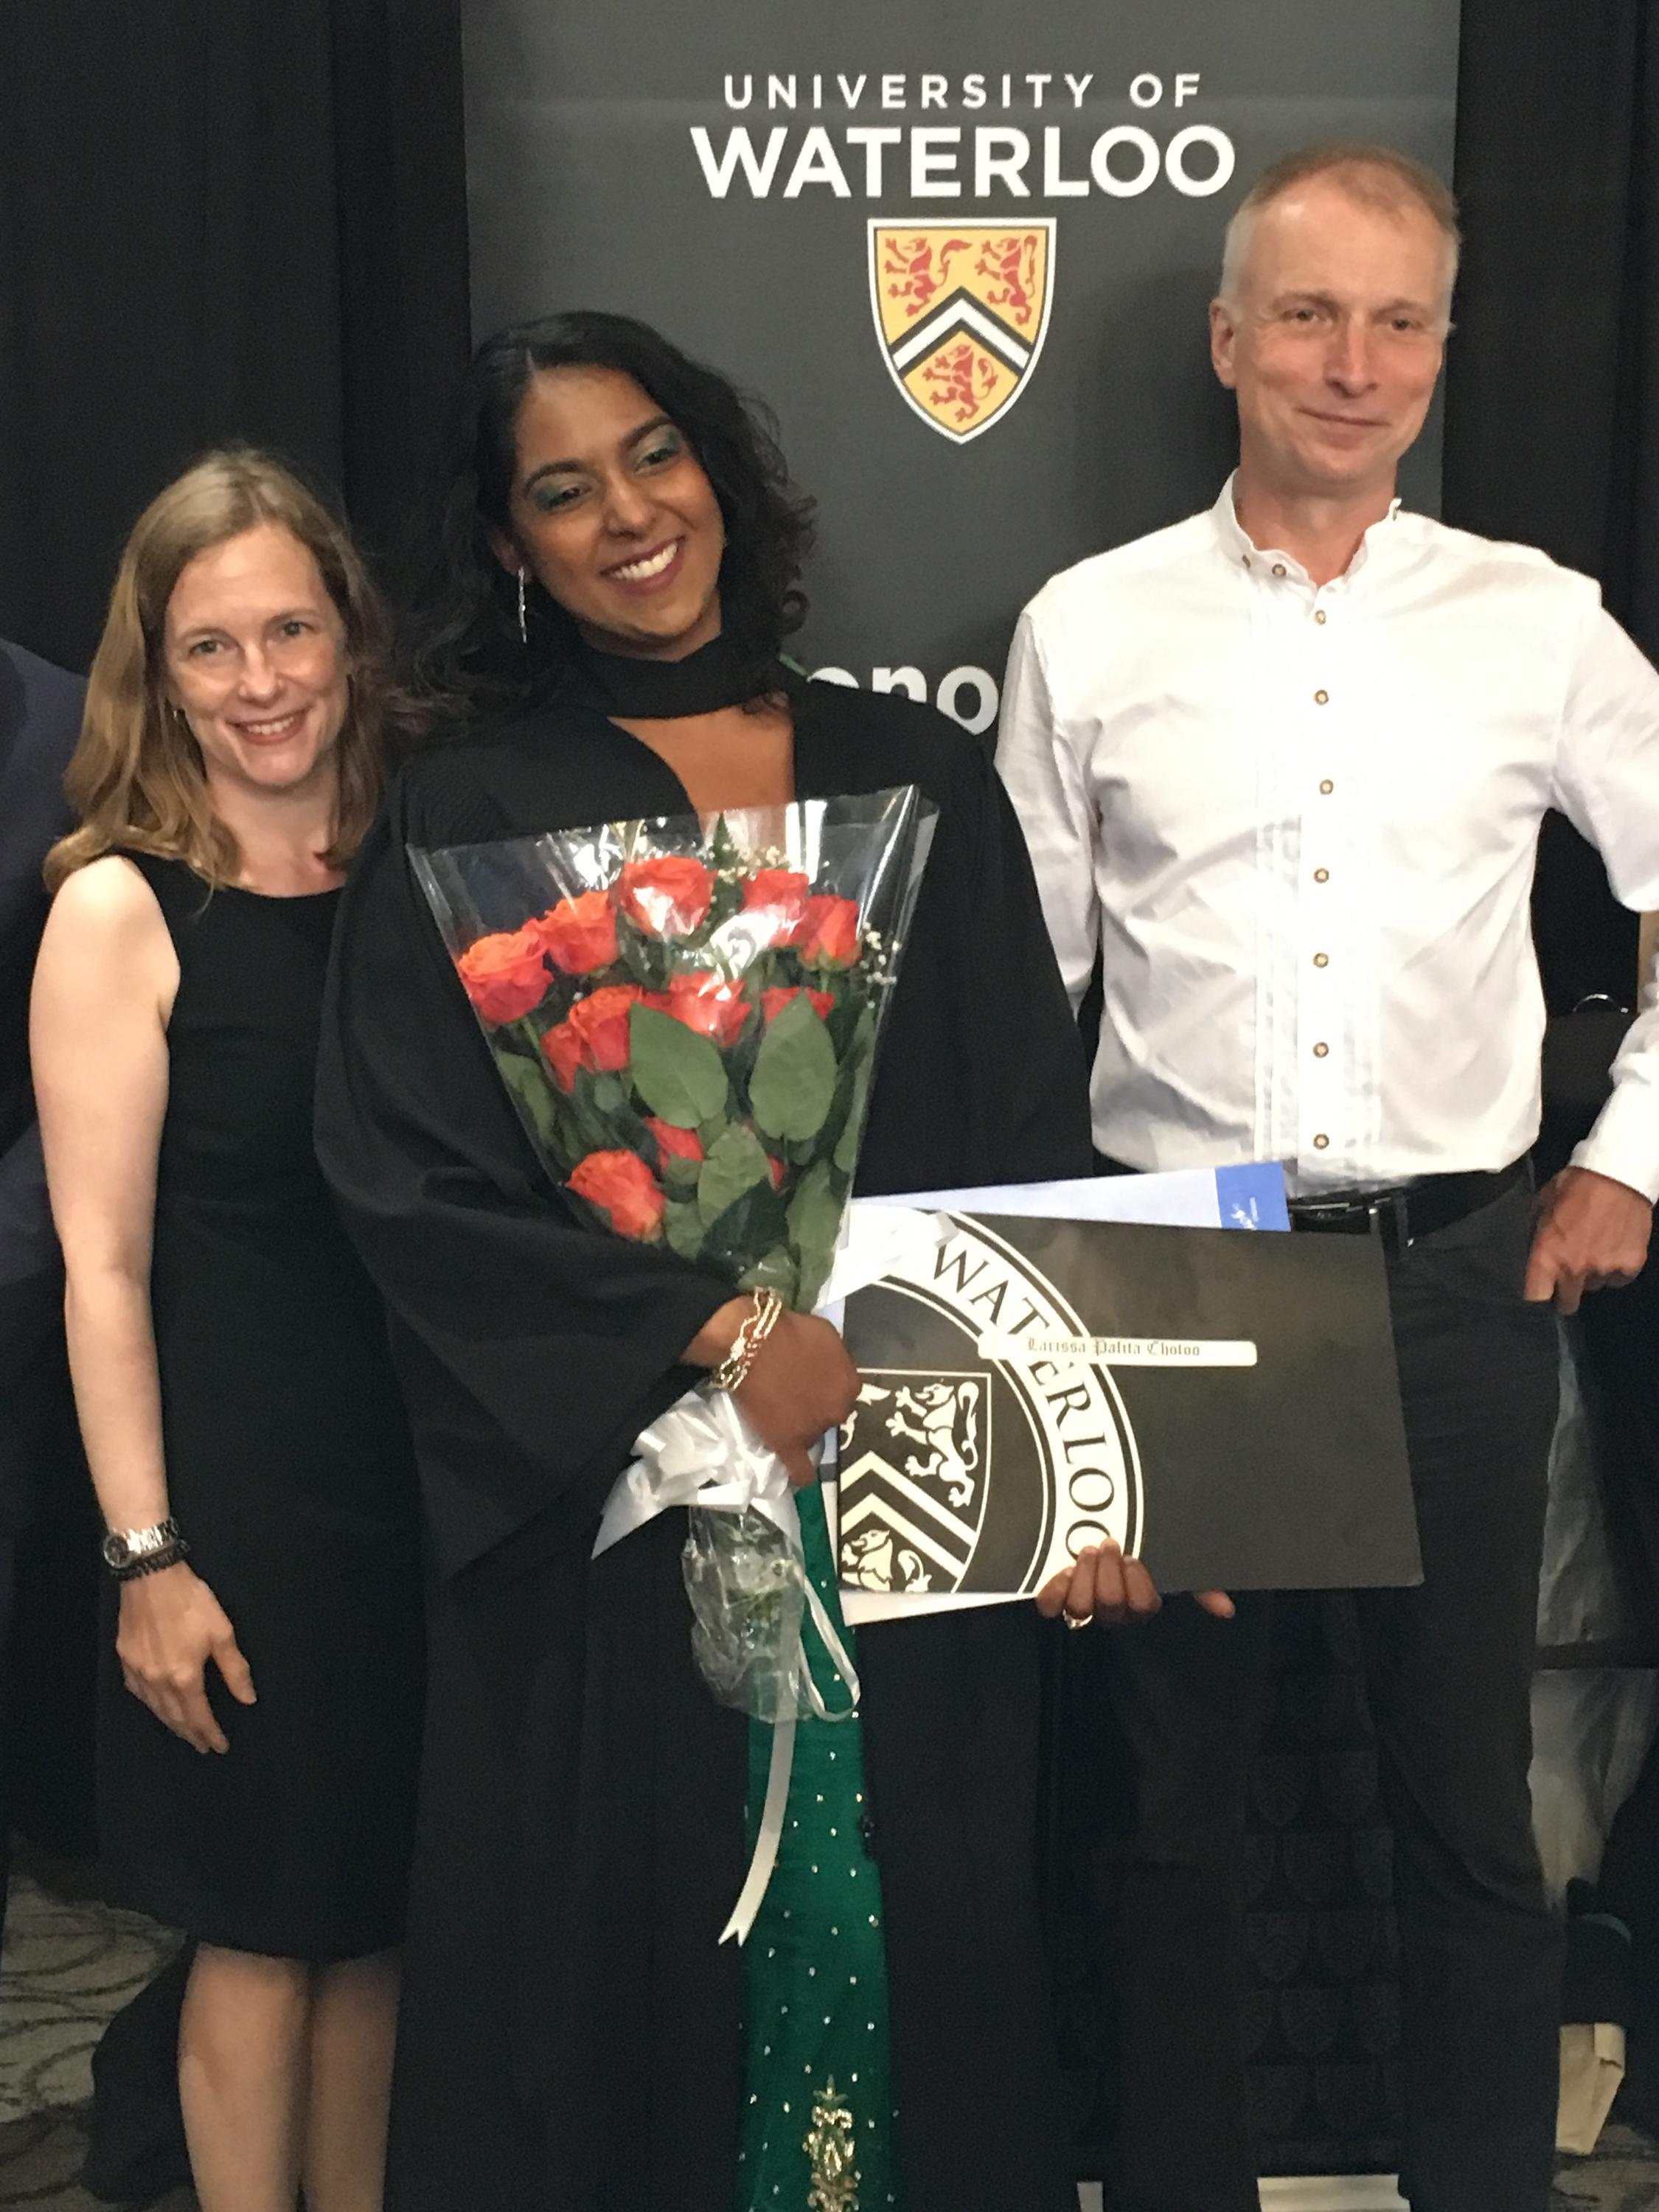 Student holding flowers sandwiched between two faculty members